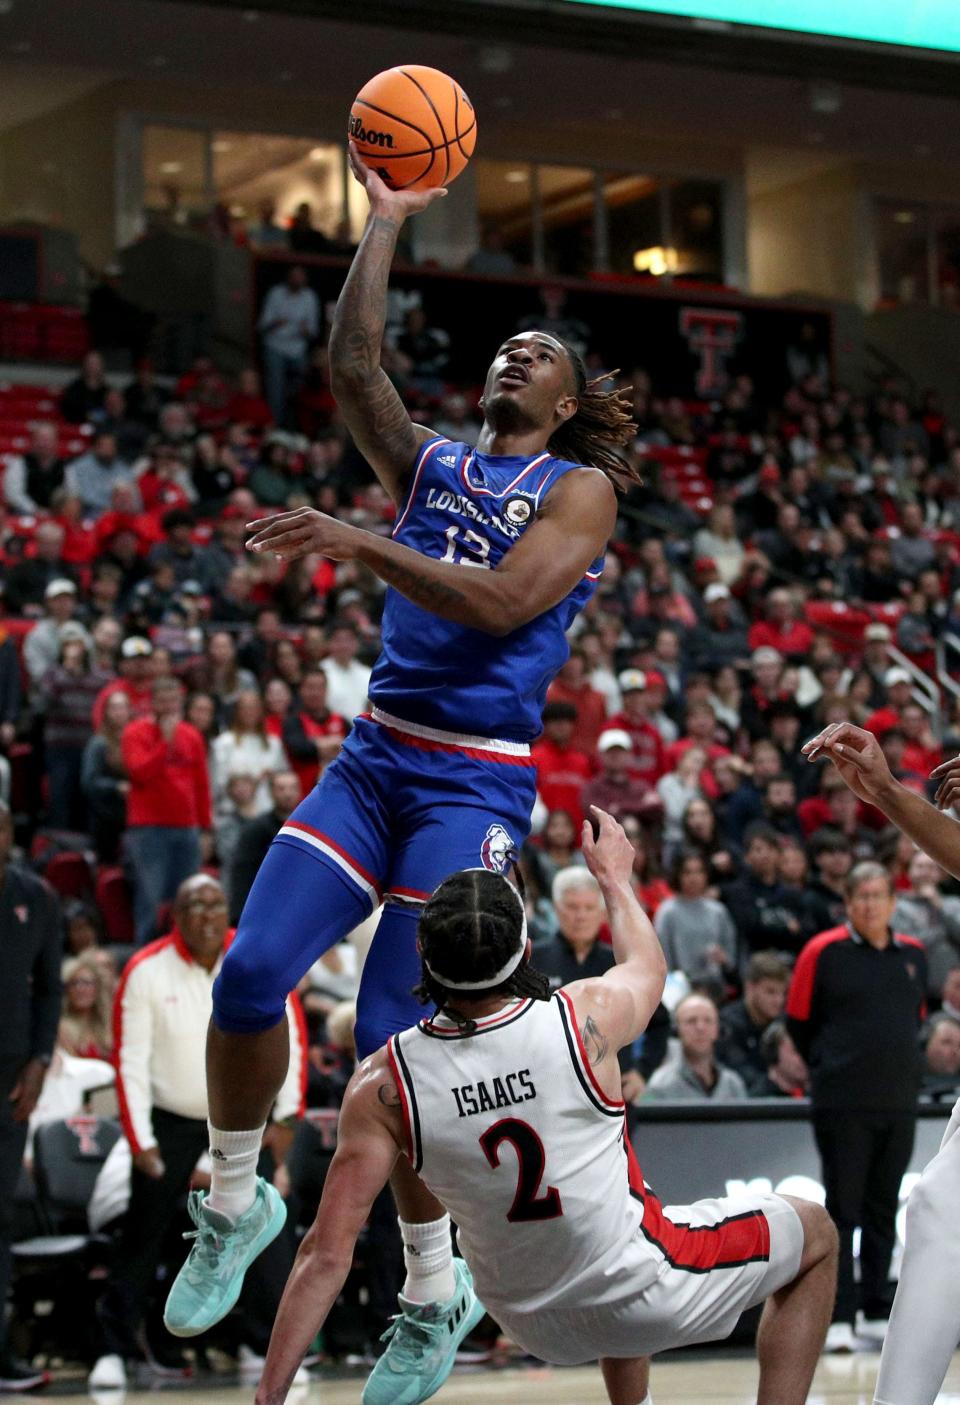 Nov 14, 2022; Lubbock, Texas, USA;  Louisiana Tech Bulldogs forward David Green (13) drives to the basket over Texas Tech Red Raiders guard Pop Isaacs (2) in the first half at United Supermarkets Arena. Mandatory Credit: Michael C. Johnson-USA TODAY Sports